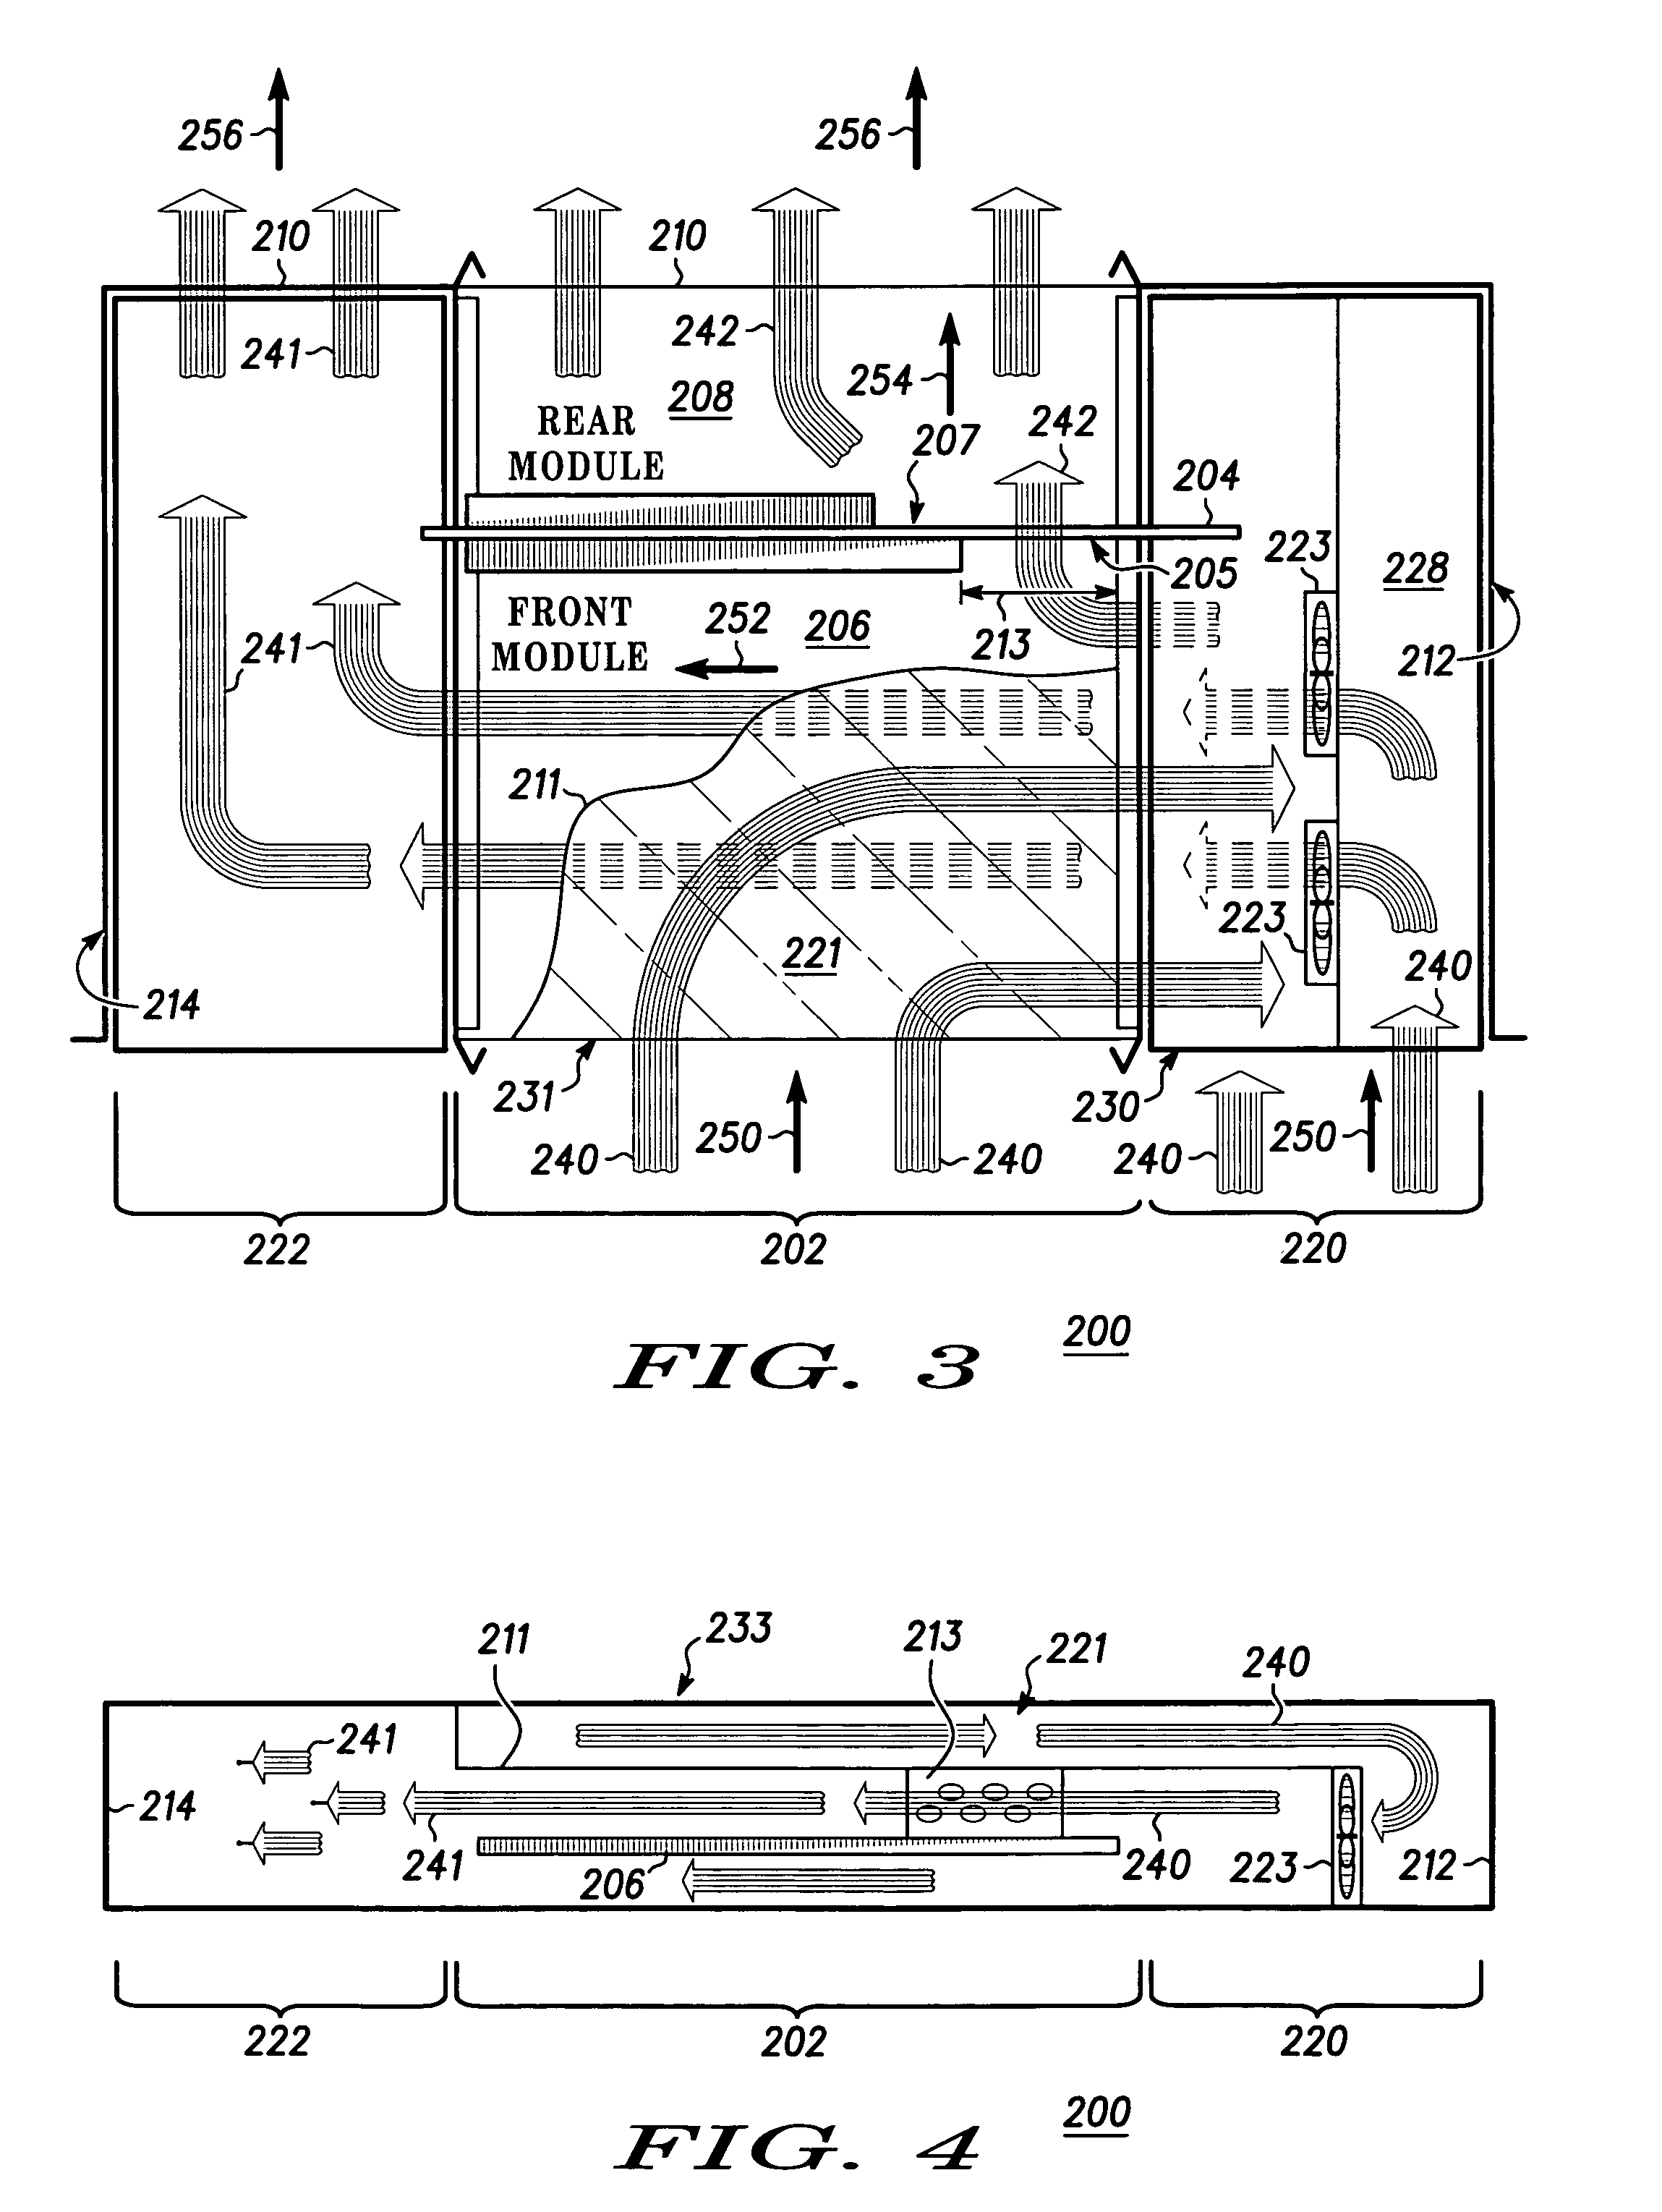 Method and apparatus for cooling a module portion